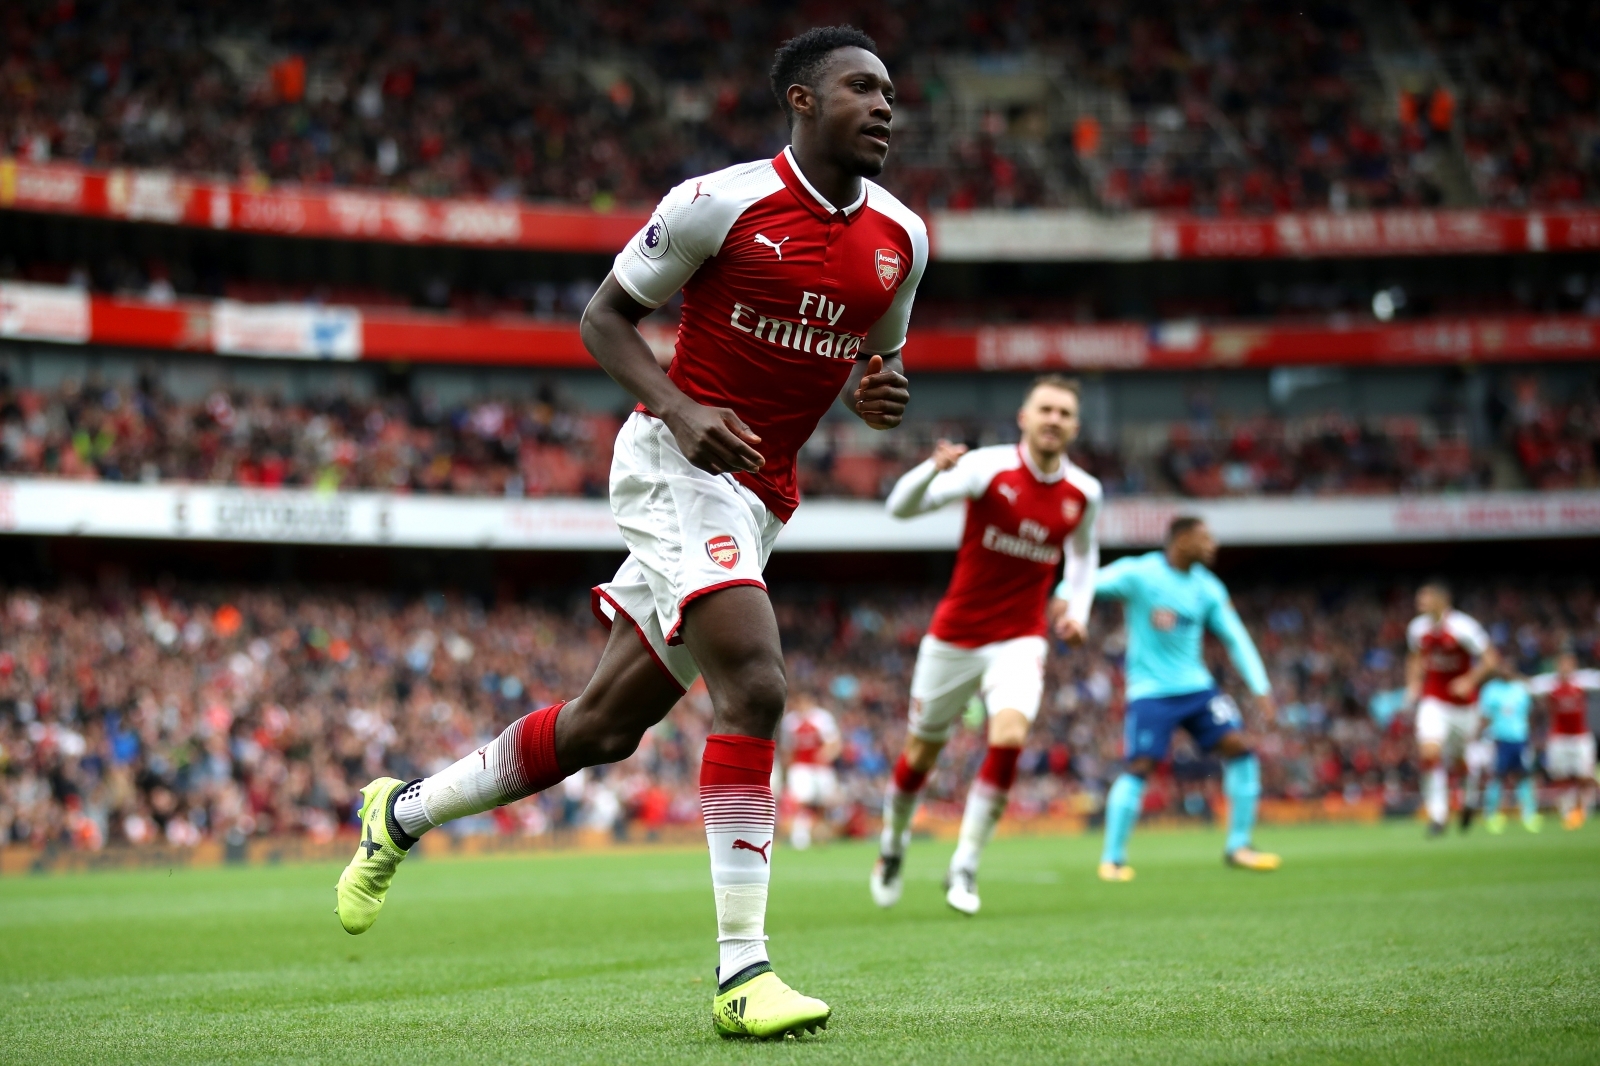 Wenger Silent About Welbeck’s Dive Accusations